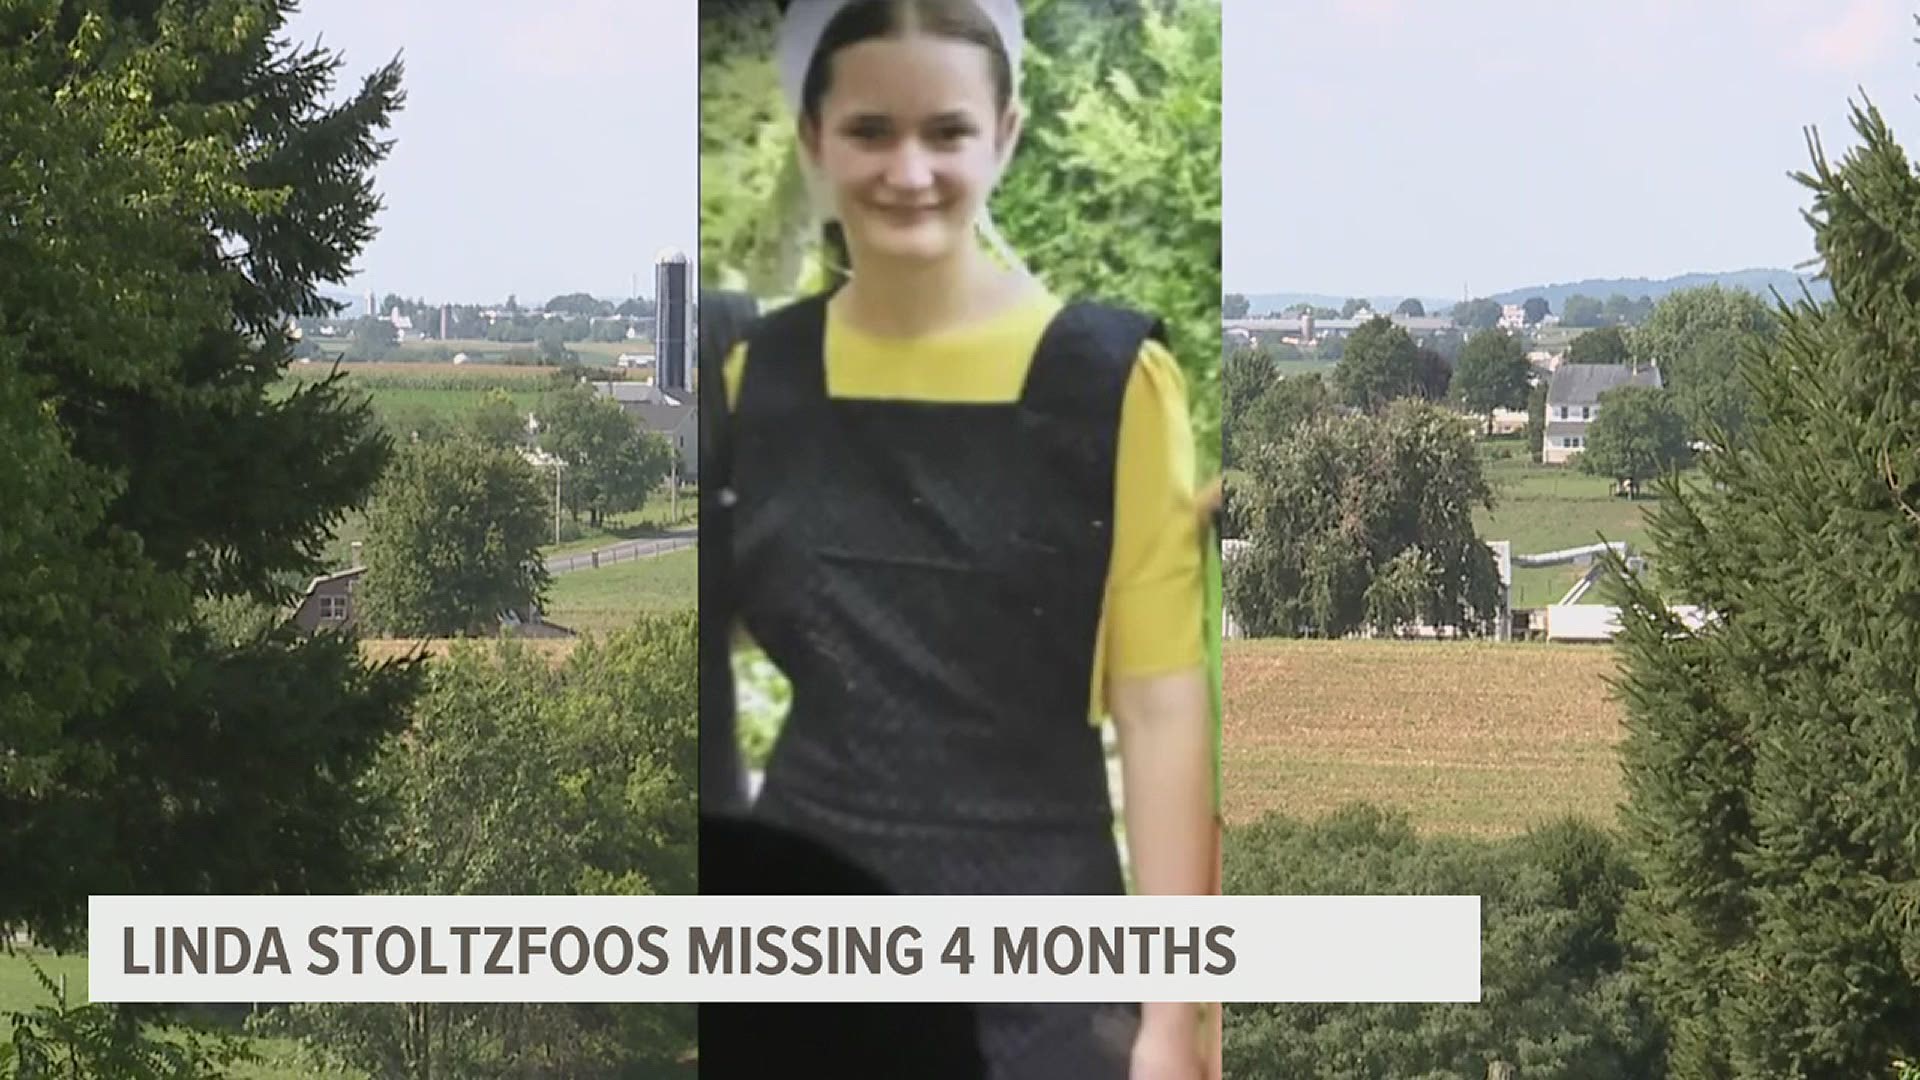 June 21 was the last day Amish teenager Linda Stoltzfoos was seen. Four months later, the 18-year-old remains missing and the search for her continues.